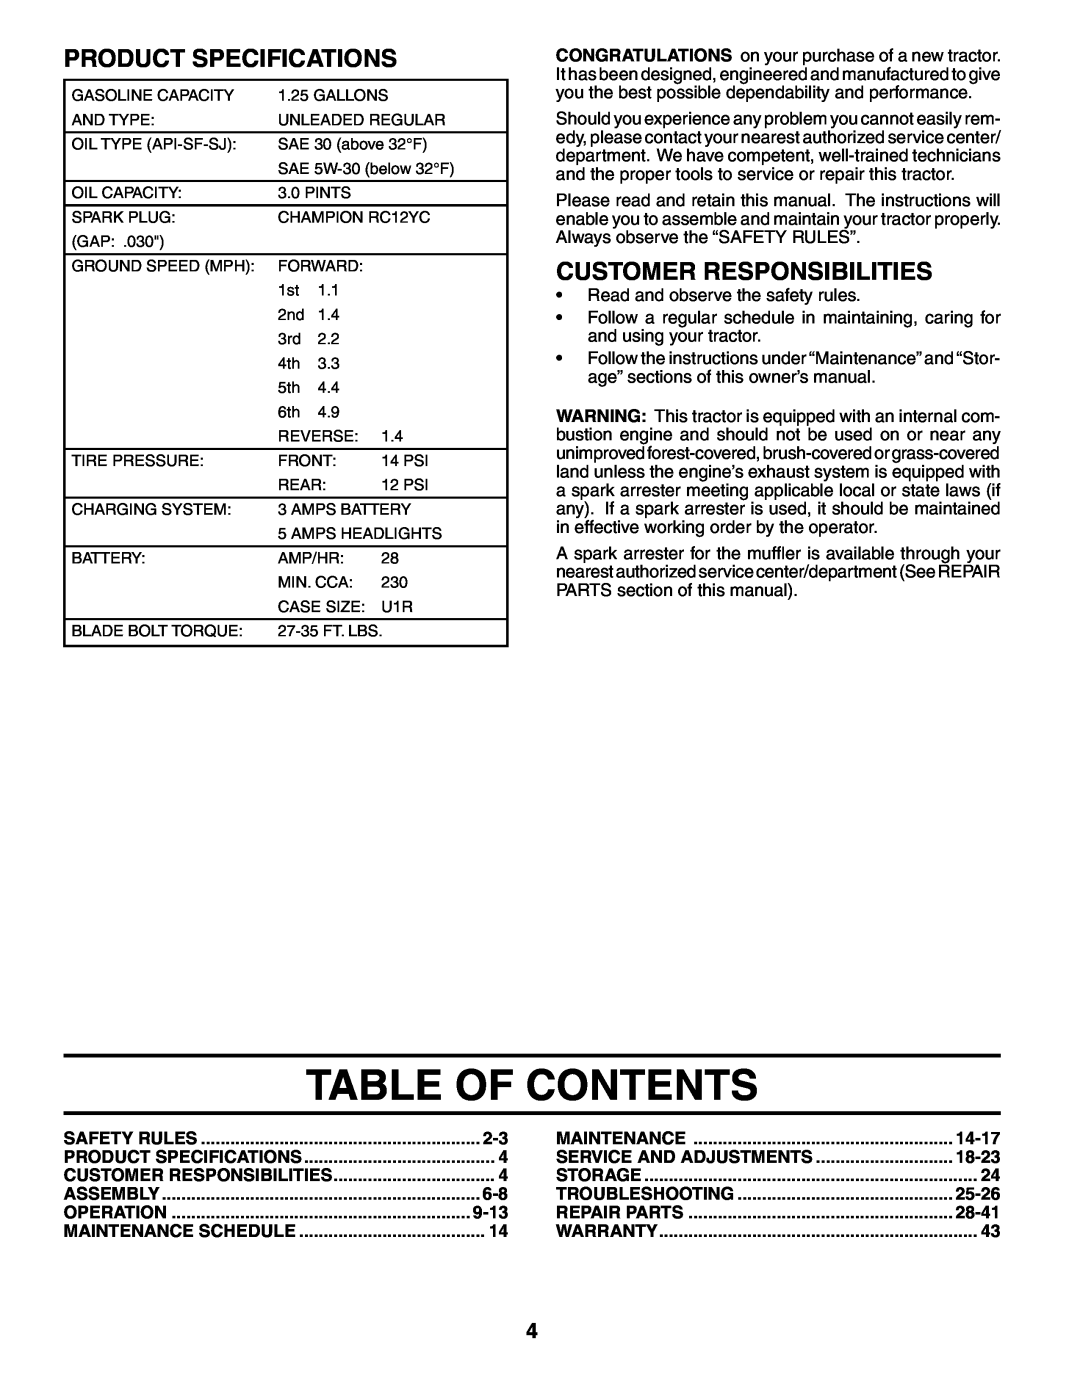 Poulan 192087 manual Table Of Contents, Product Specifications, Customer Responsibilities 